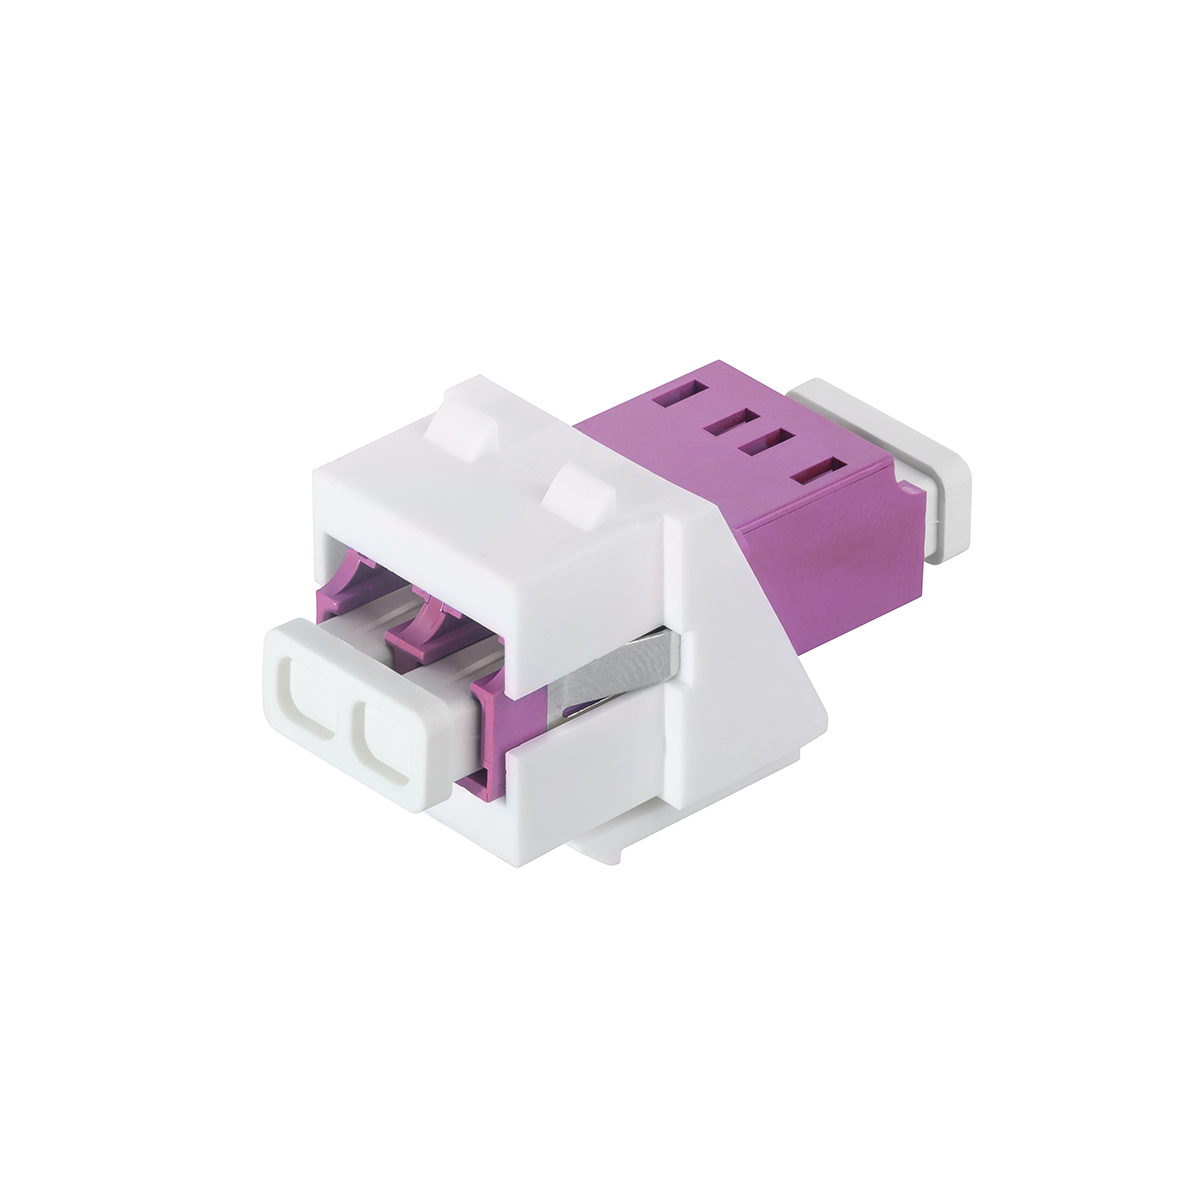 LC-Duplex multimode OM4 adapter violet with keystone adapter